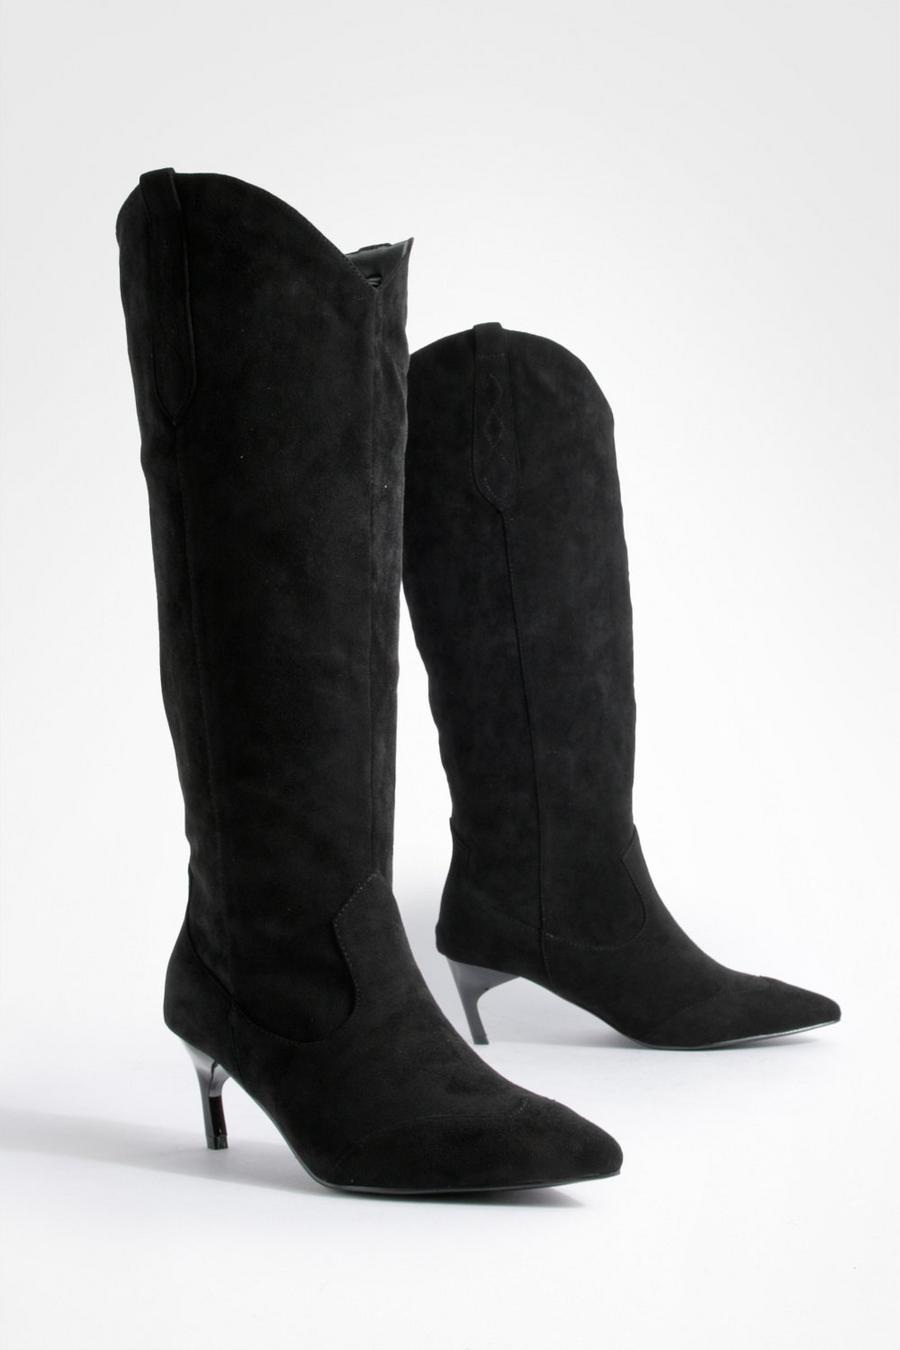 Black Western Detail Low Knee High Boots